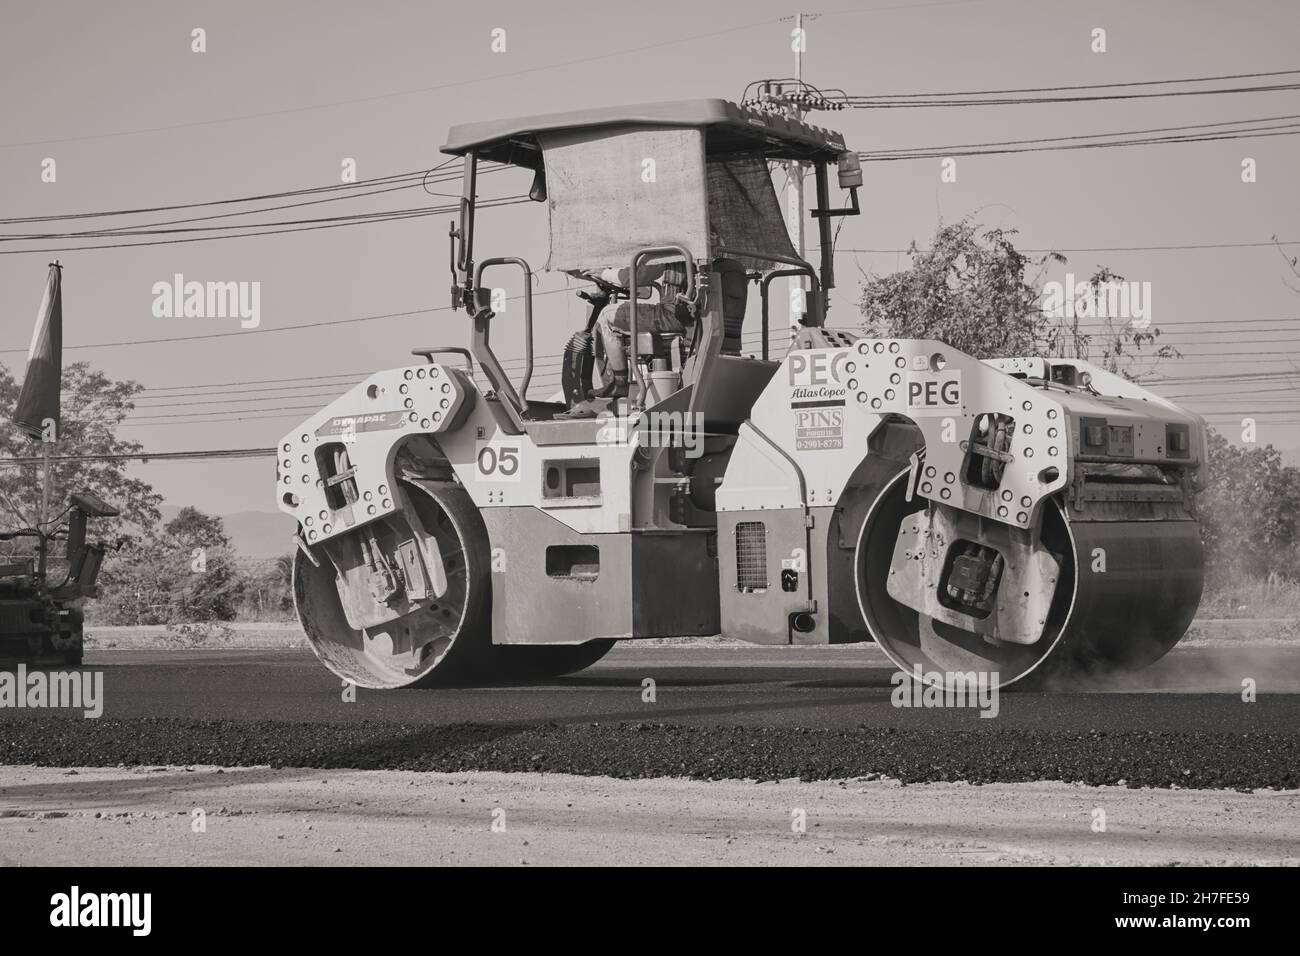 Phayao, Thailand - 27. Jan 2021: Zoom Back View Black and White Worker and Road Roller on Asphalt Road Stockfoto